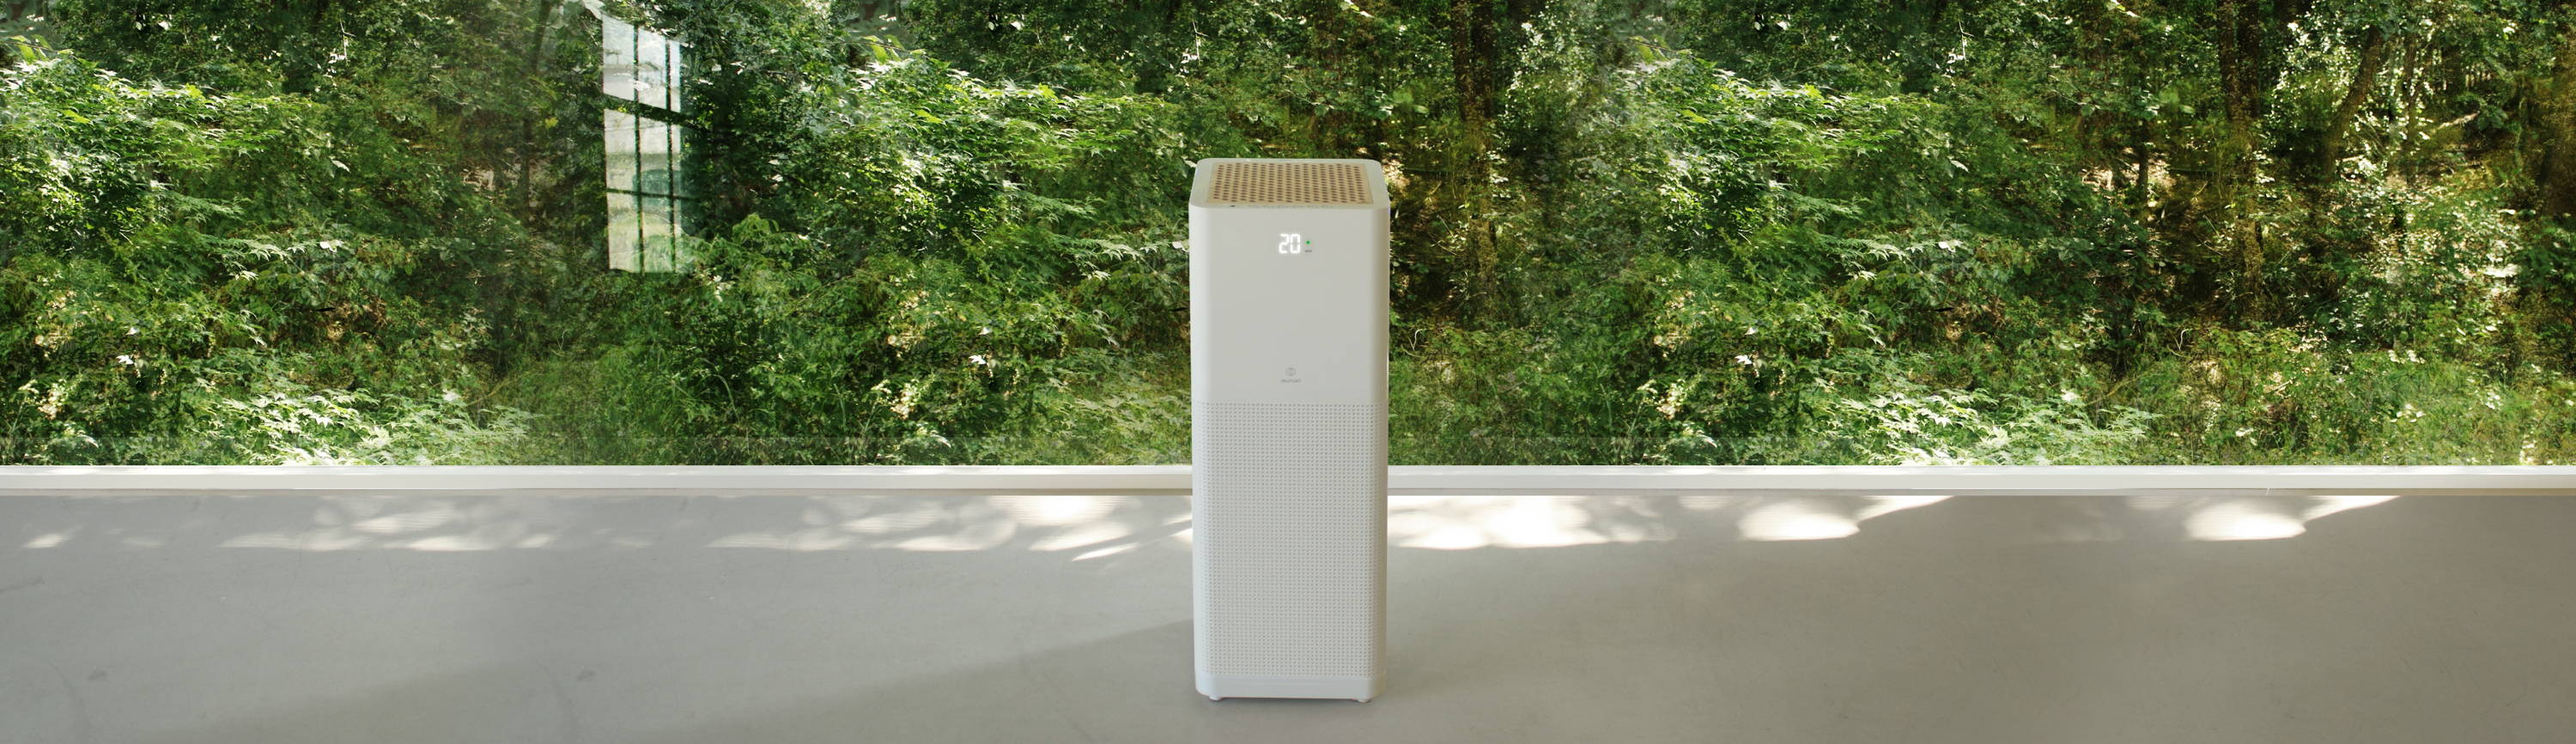 Tower Type Air Purifier Image